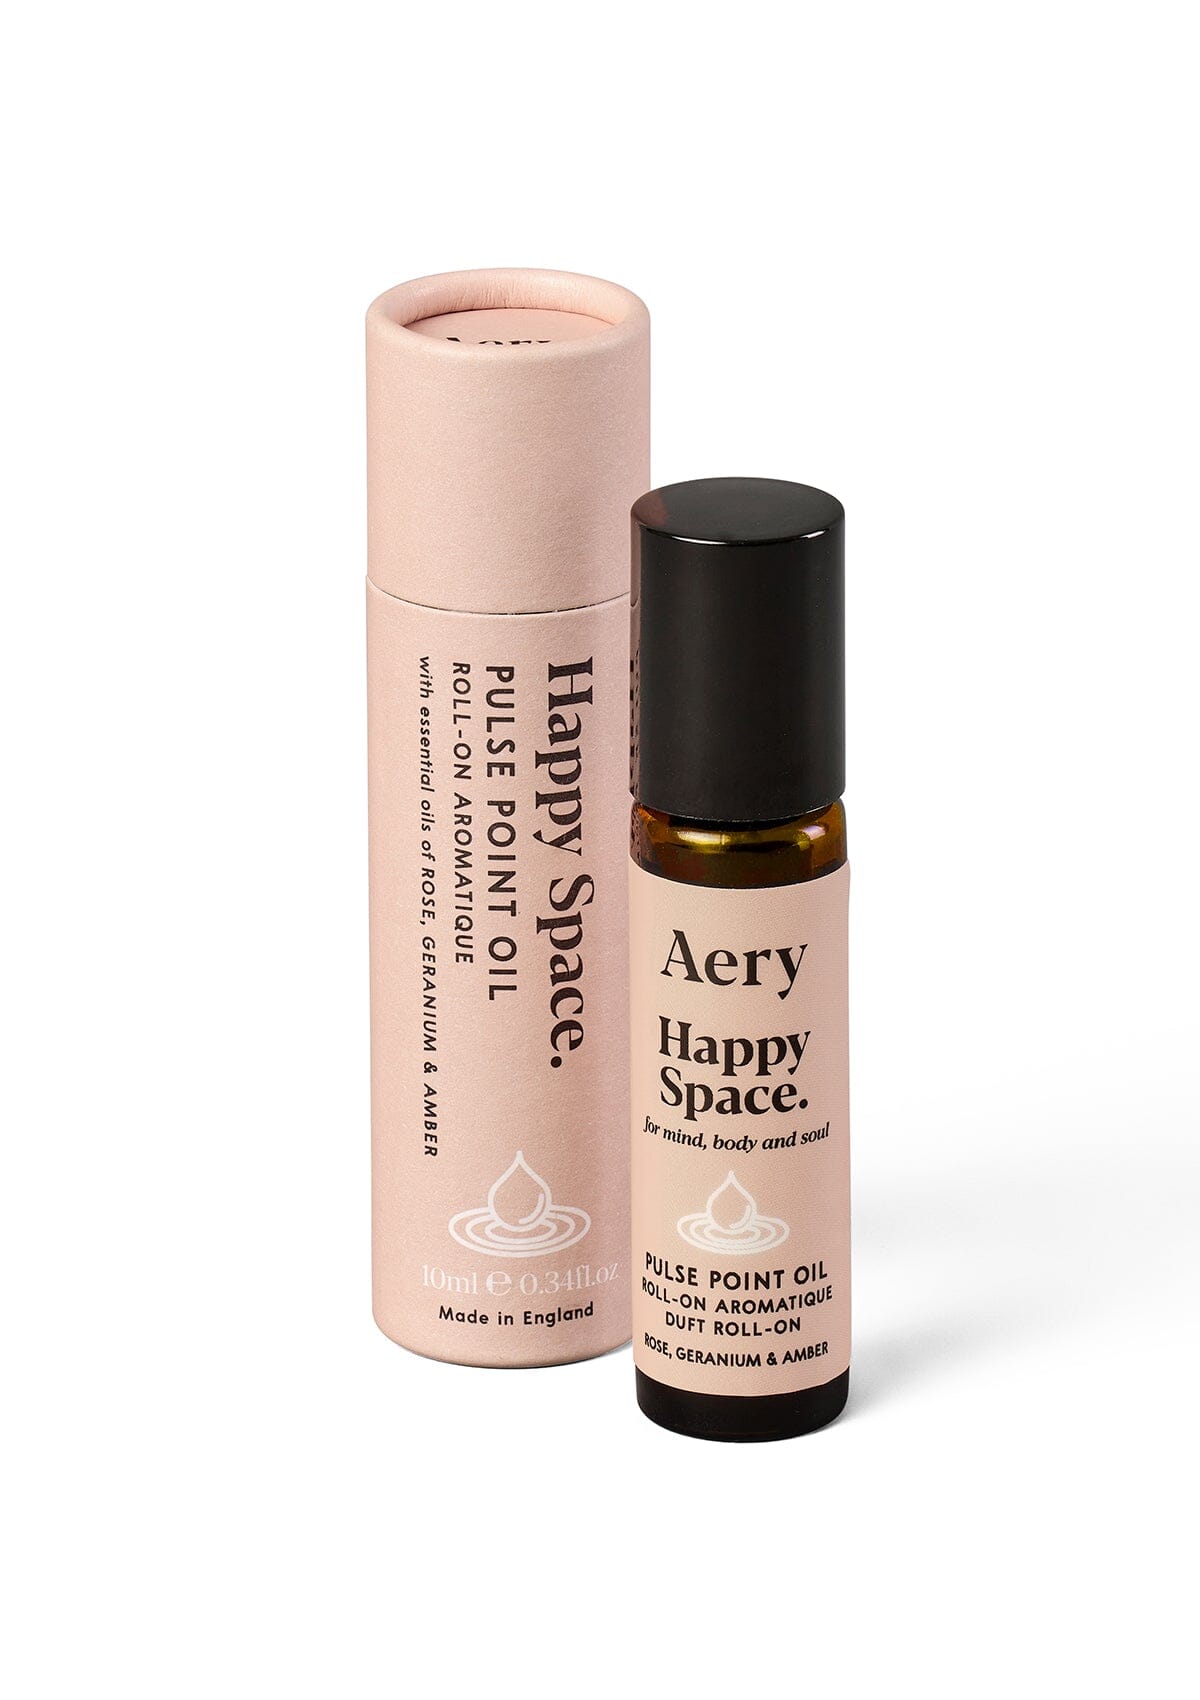 Pink Happy Space pulse point oil by Aery displayed next to product packaging on white background 